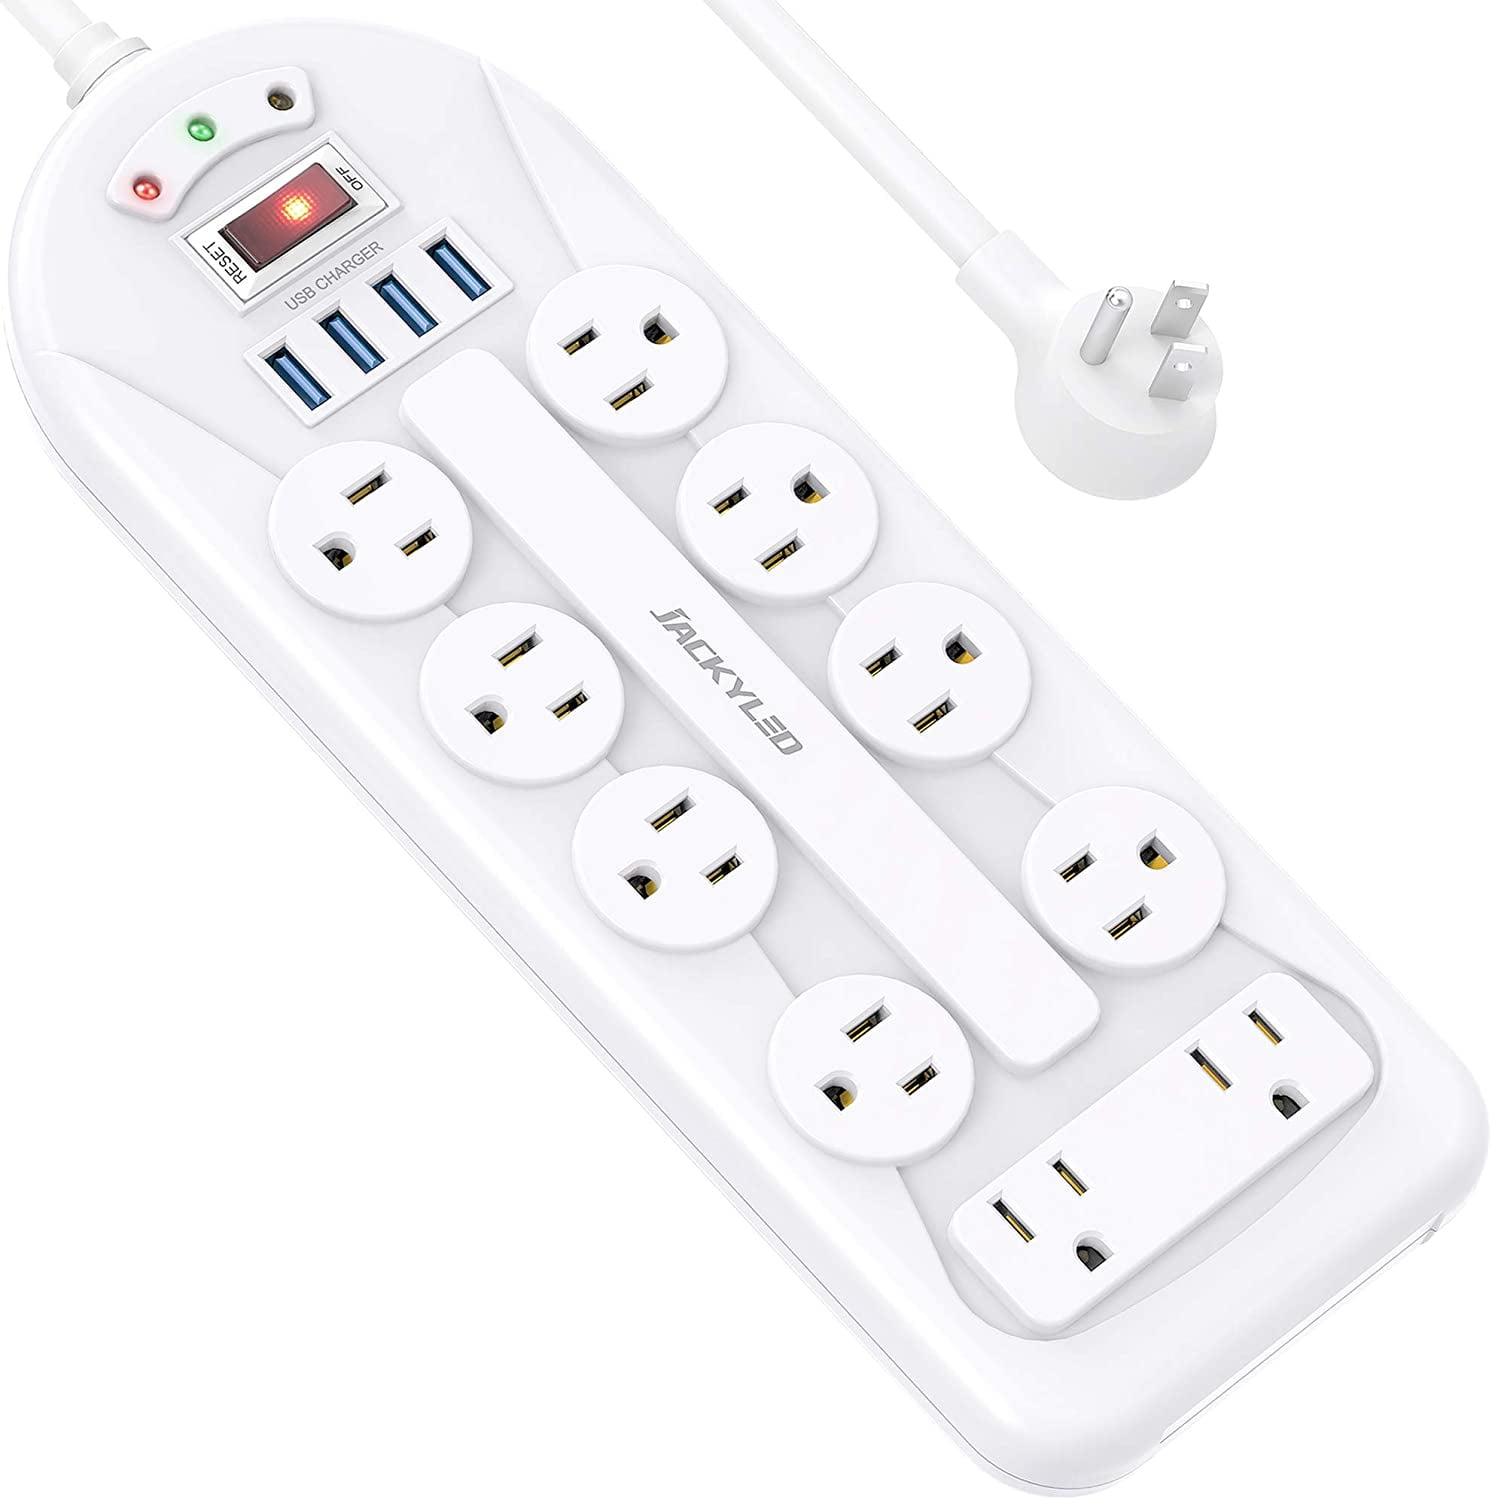 Details about   Wall Mountable Flat Plug Long Extension Cord 3 USB Surge Protector Power Strip 